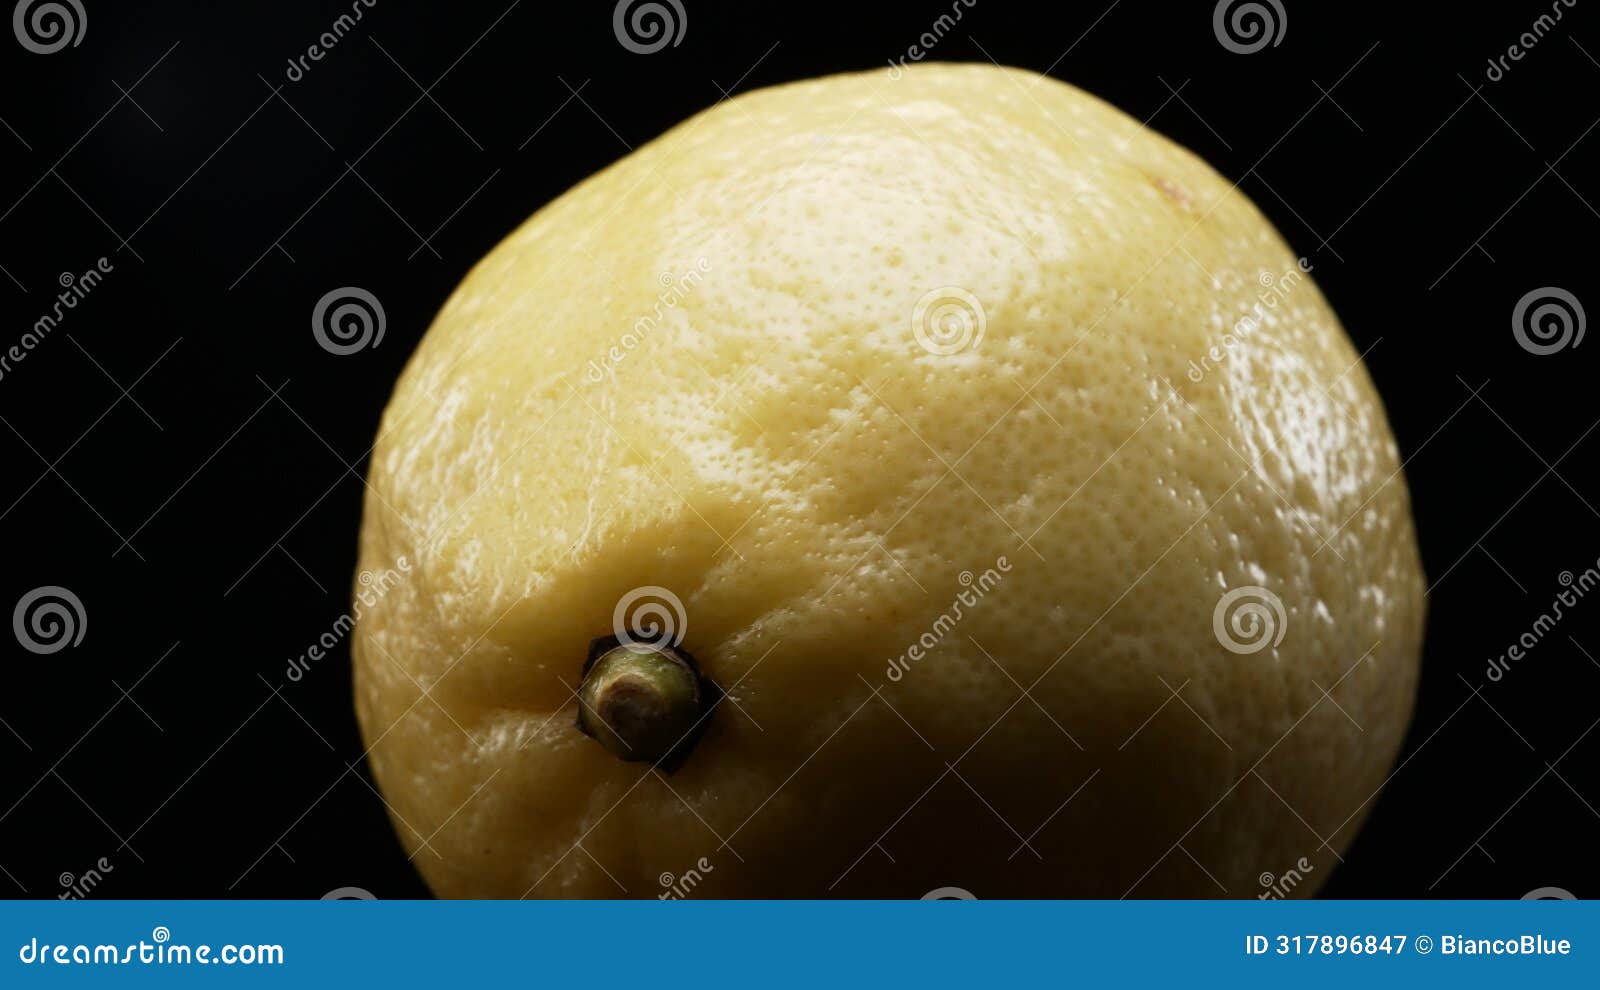 macrography of a lemon against a bold black background. close up. comestible.